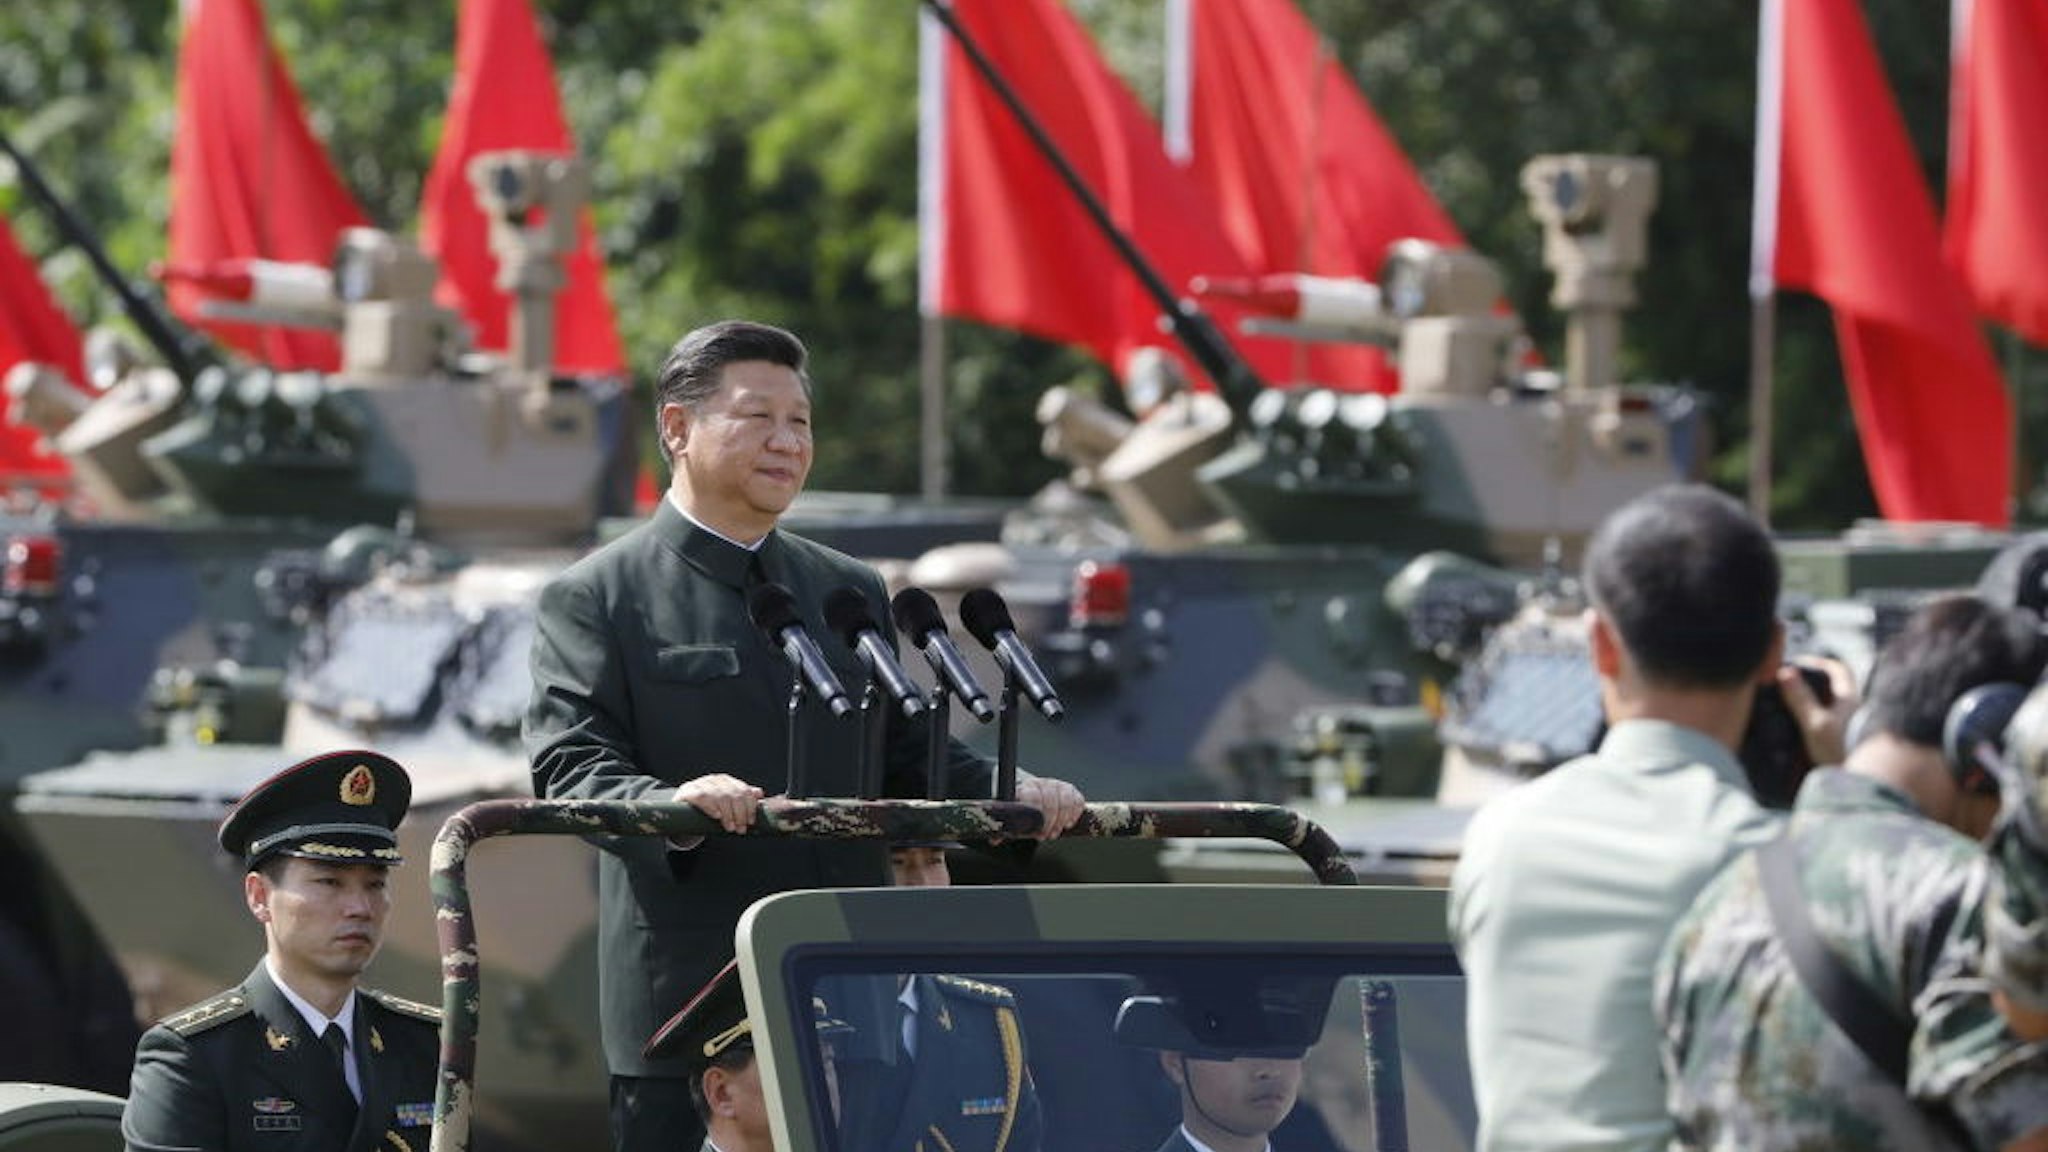 Xi Jinping, China's president, rides in a vehicle as he reviews People's Liberation Army (PLA) troops at the Shek Kong Barracks in Hong Kong, China, on Friday, June 30, 2017. Xi sought to reassure a divided Hong Kong of China’s continued support for the former British colony, as pro-democracy protesters struggled to be heard behind road blocks and police lines. Photographer: Anthony Kwan/Bloomberg